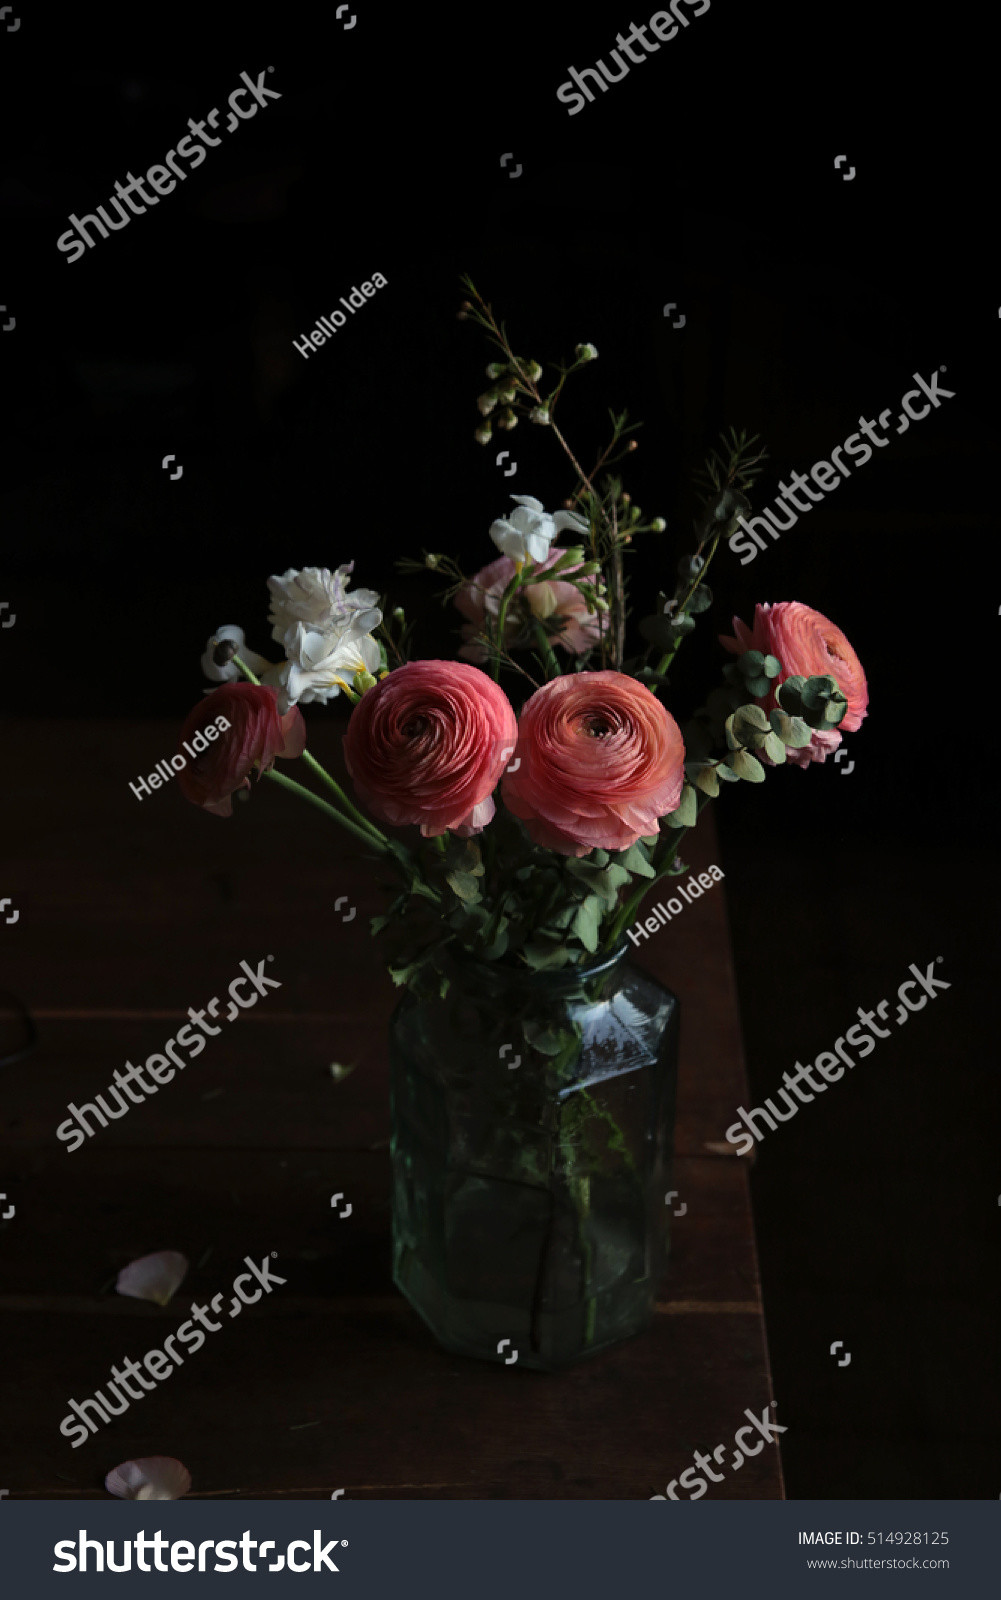 11 Perfect Rose Gold Glass Vase 2024 free download rose gold glass vase of flower bouquet glass vase on vintage stock photo edit now with regard to flower bouquet in a glass vase on vintage table with black moody background